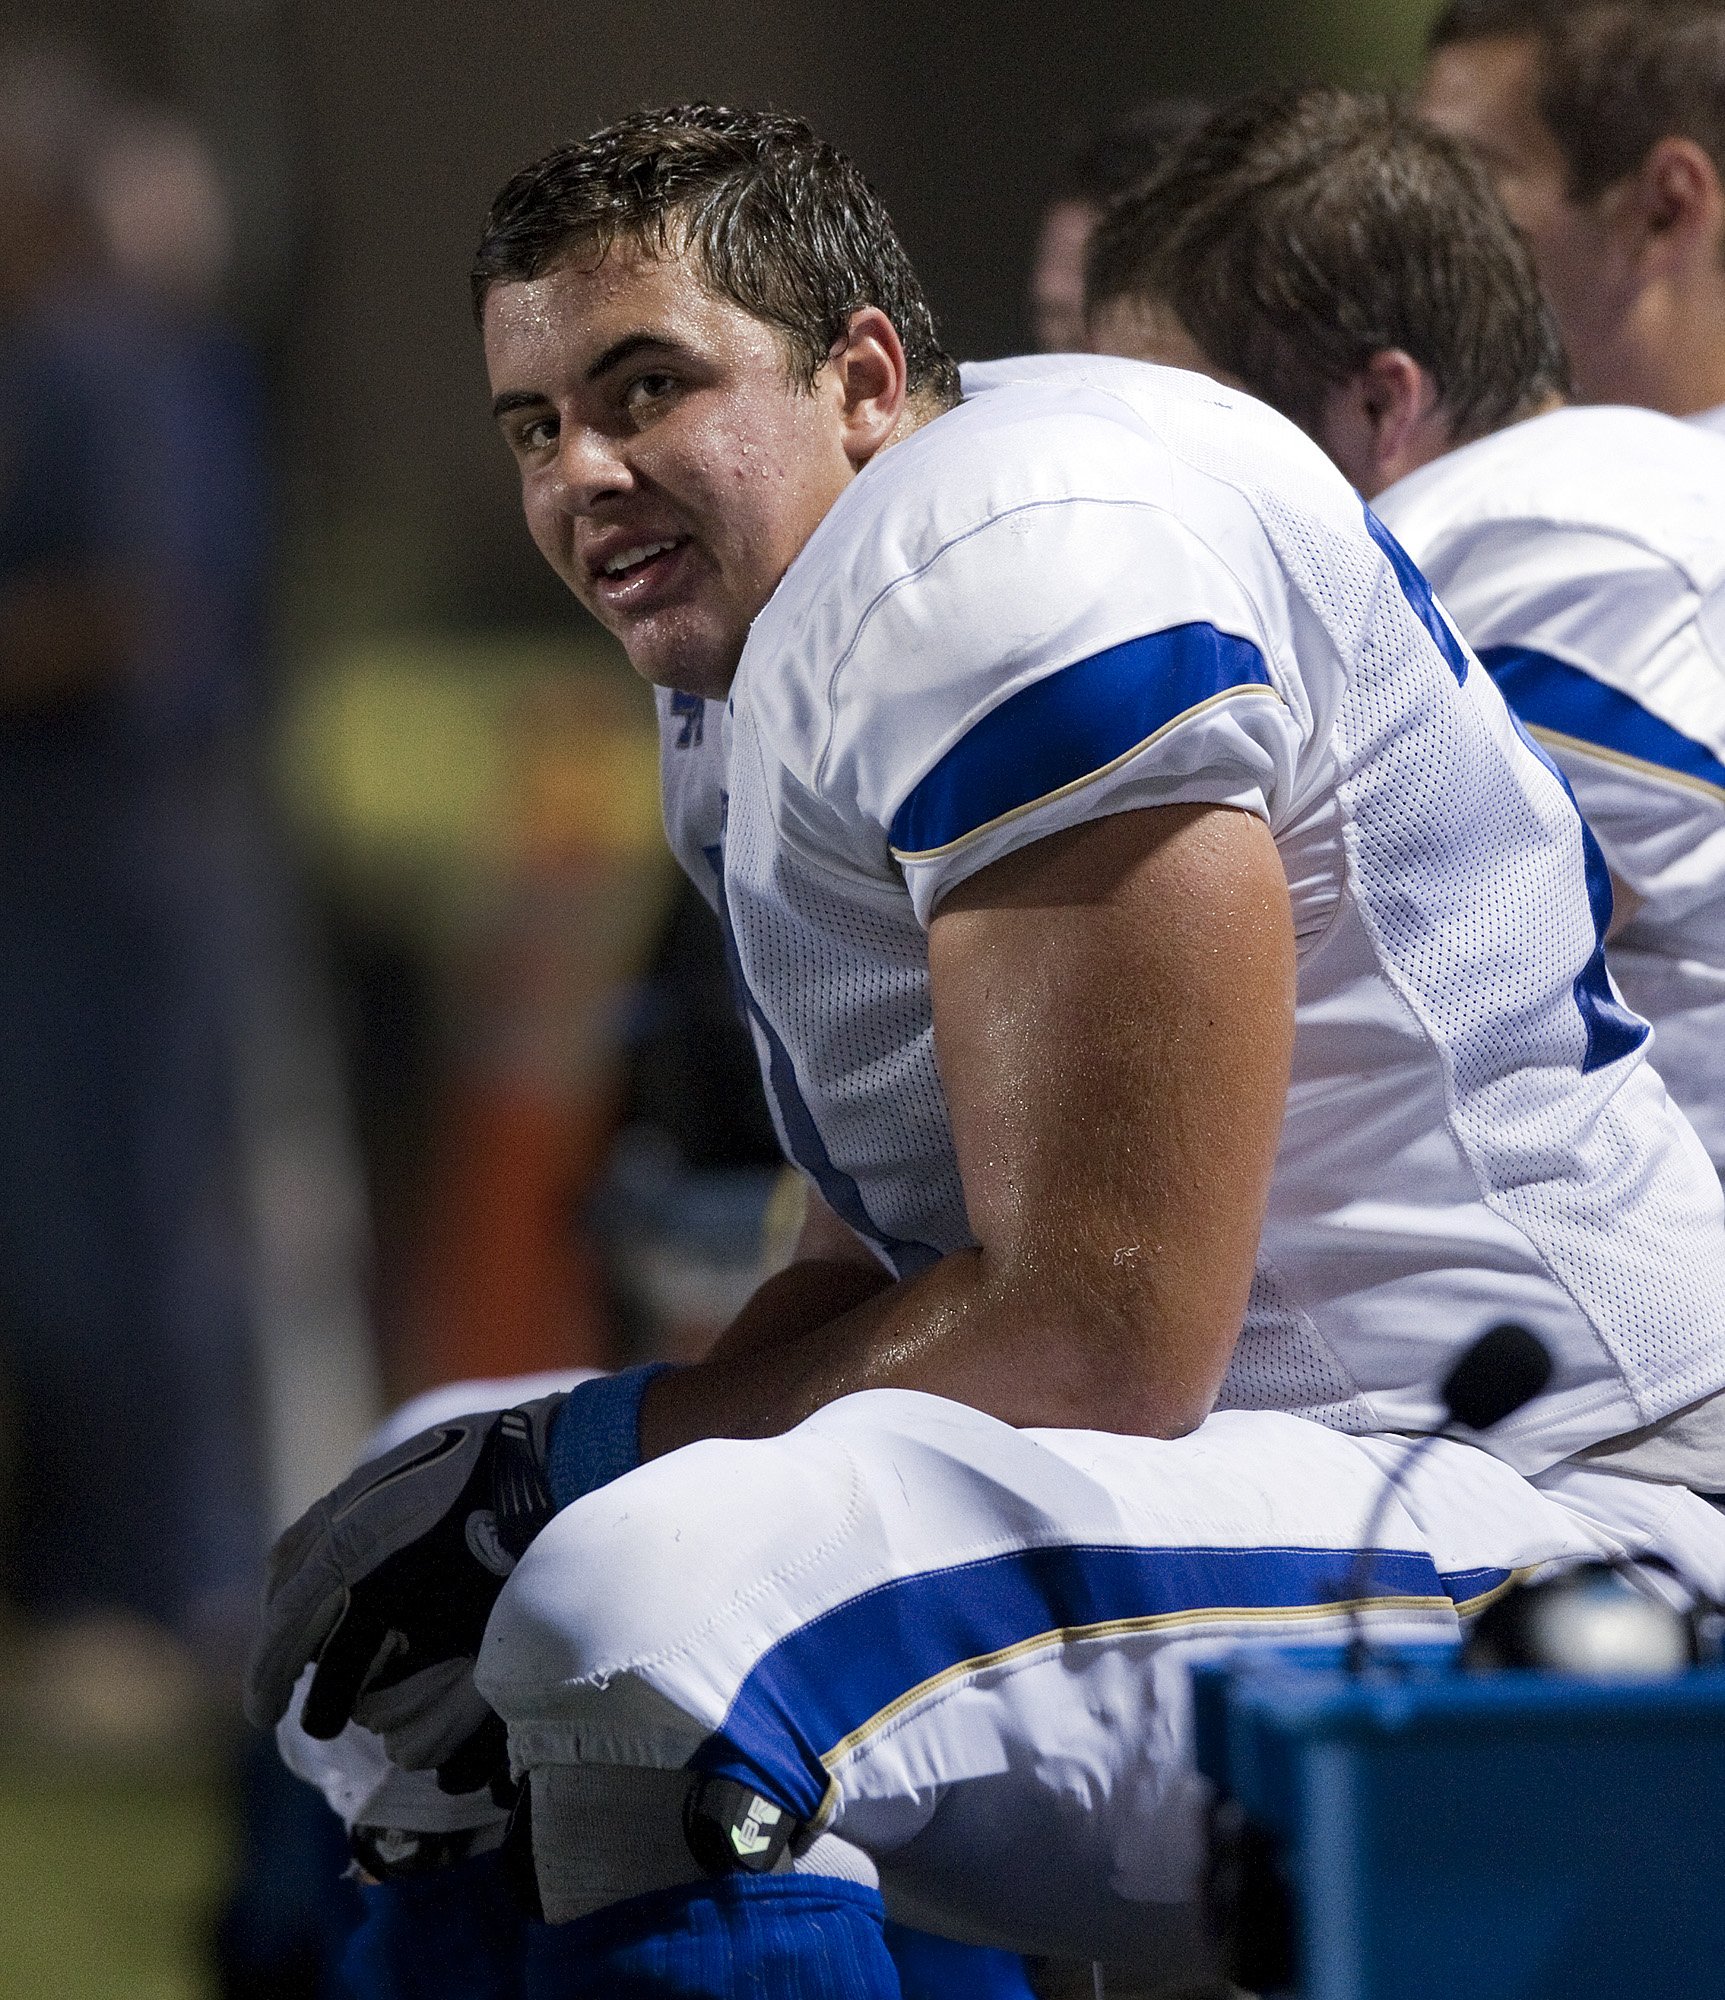 Max Tuerk takes a breather during the game against Trabuco Hills on September 15, 2011. | Source: Getty Images.